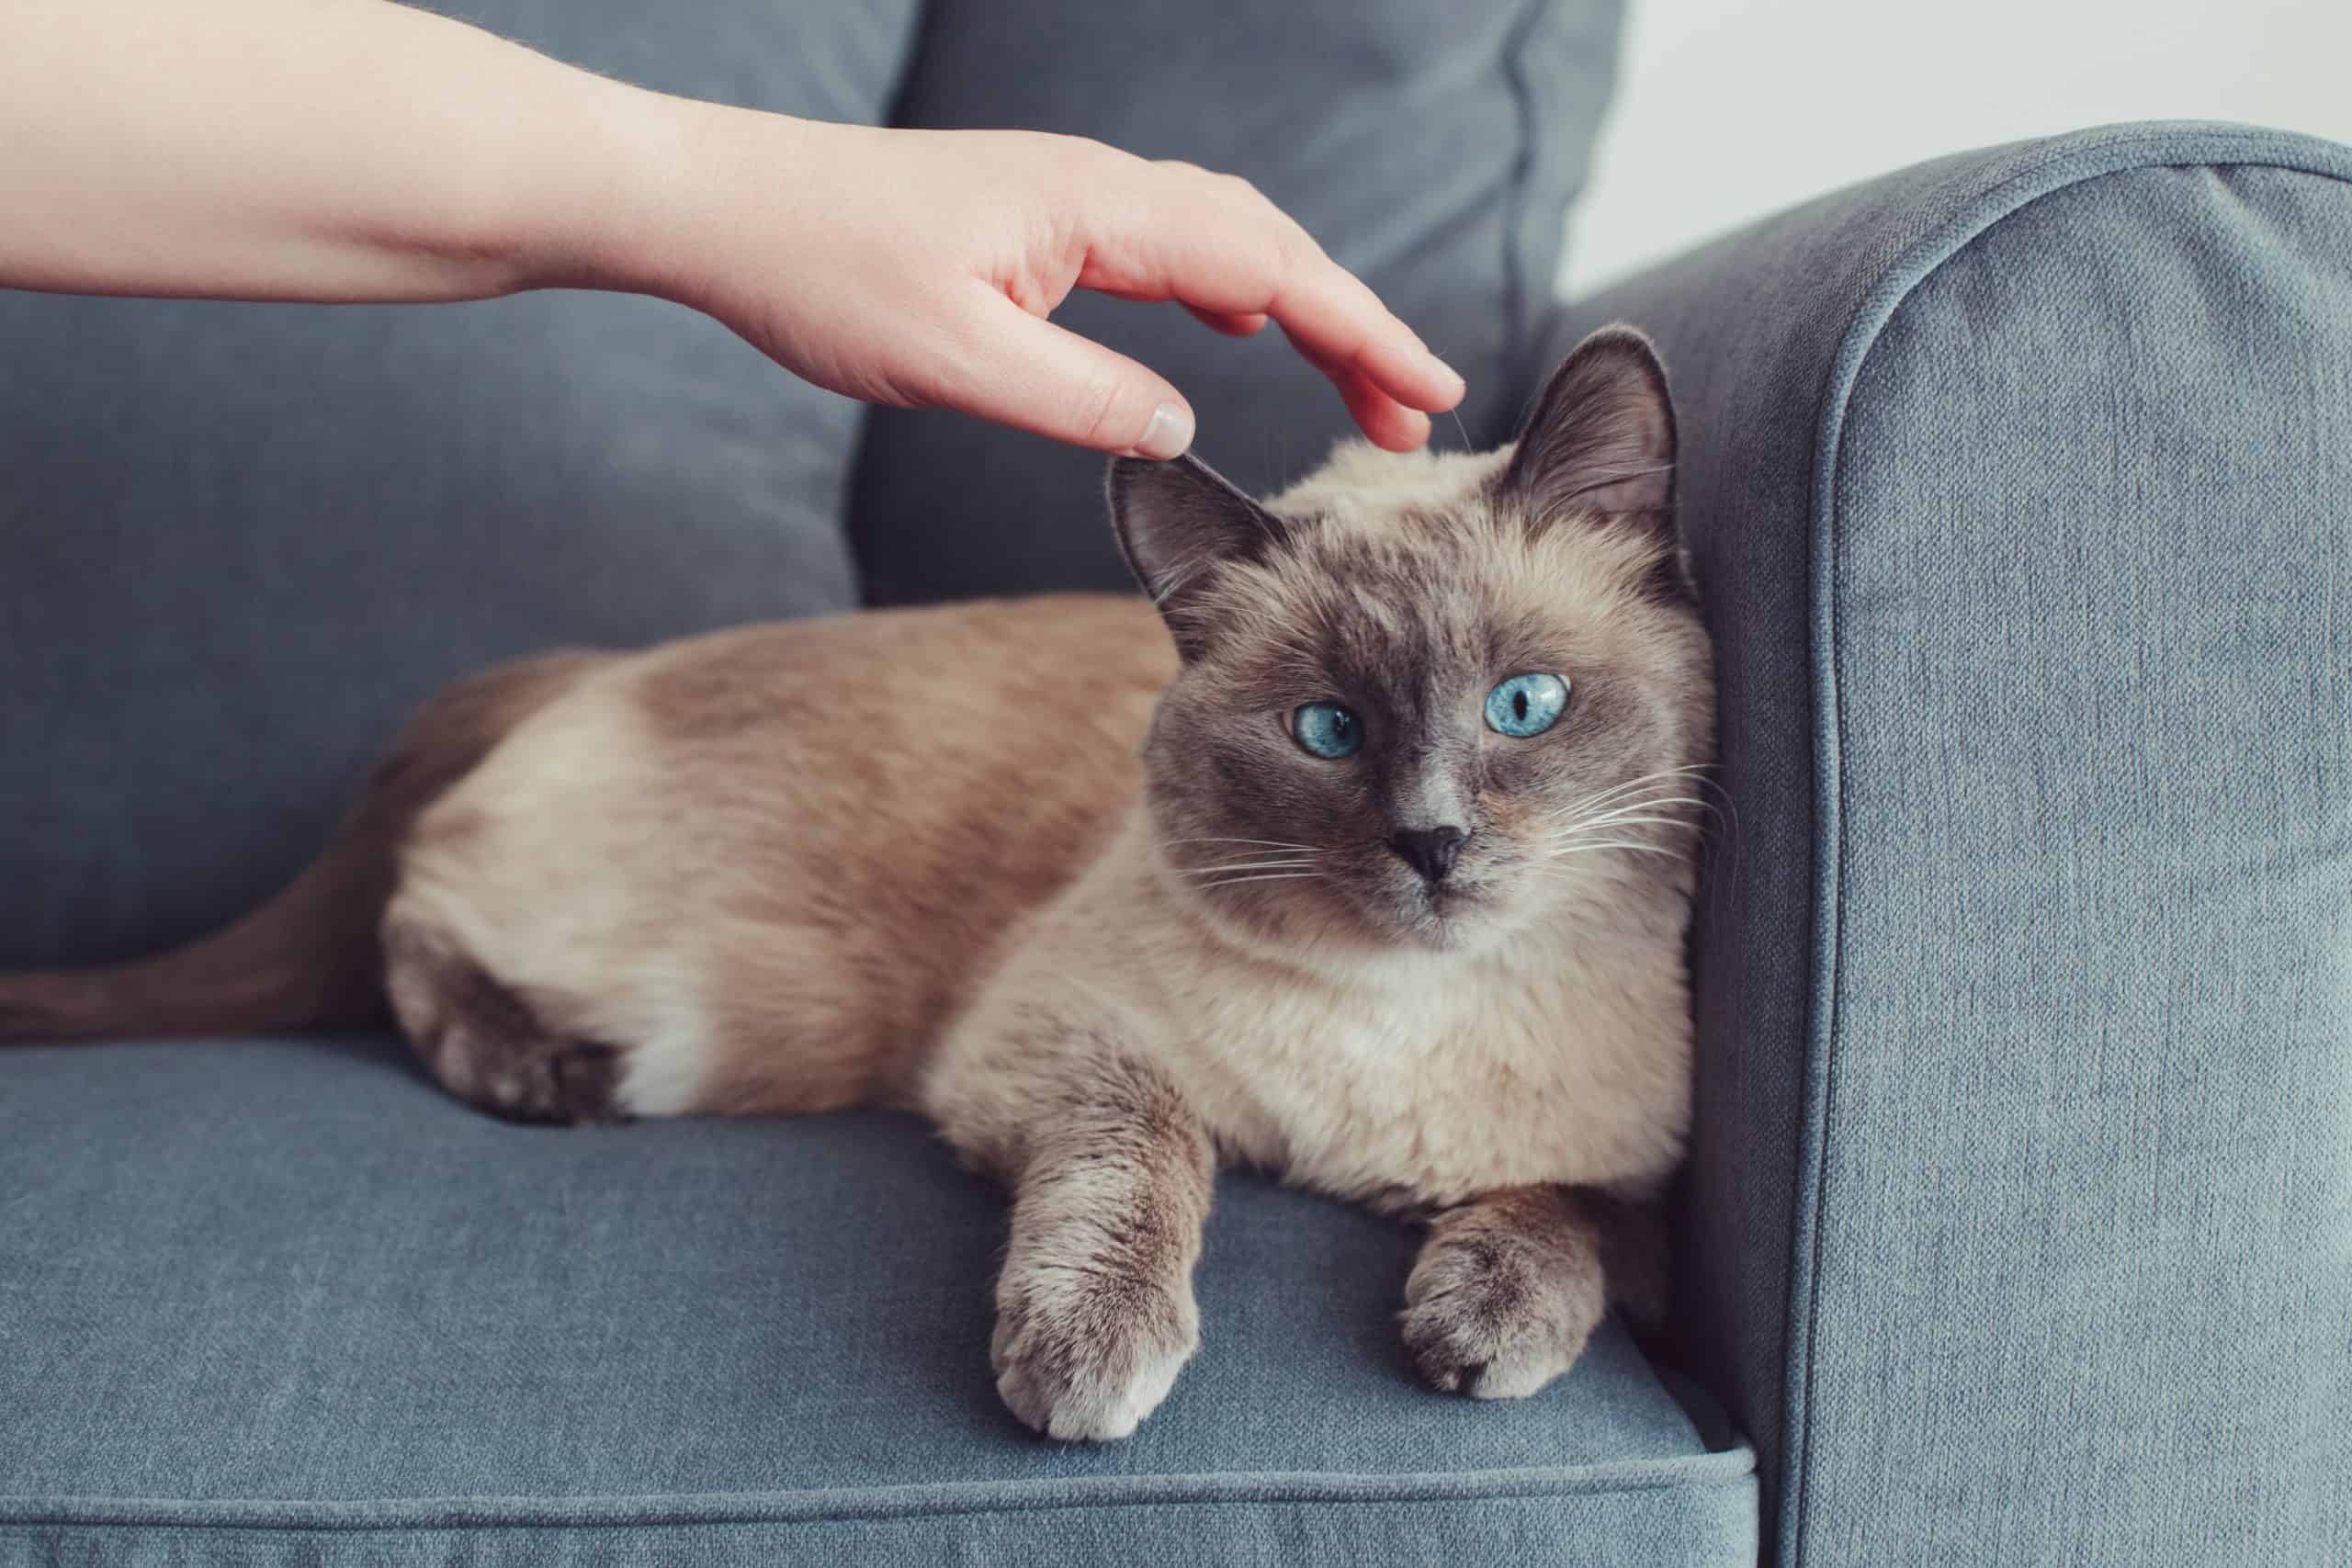 Beautiful colorpoint blue-eyed cat lying on couch sofa. Owner petting touching fluffy hairy domestic pet with blue eyes. Cute adorable feline kitten is stroked by man hand. Person eases stress